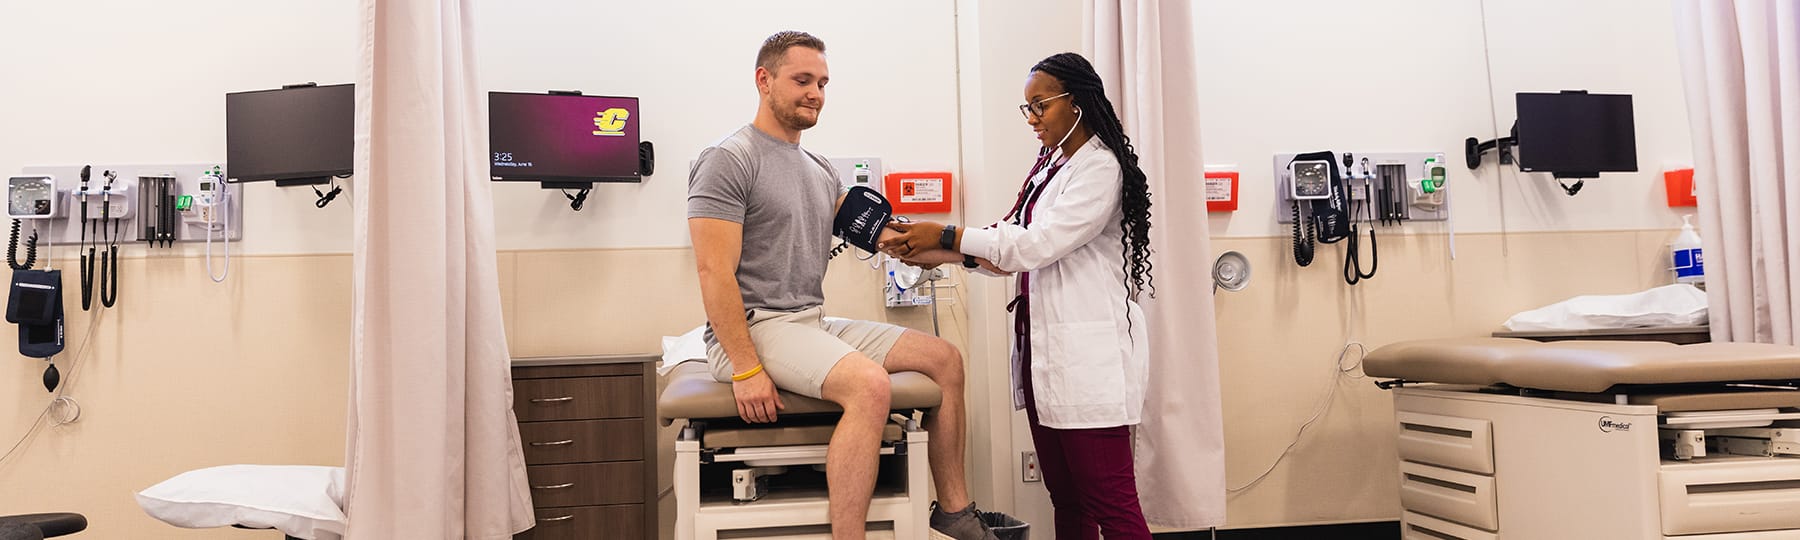 A pre-physician assistant student uses a blood pressure cuff and stethoscope to take a the blood pressure of a male patient.